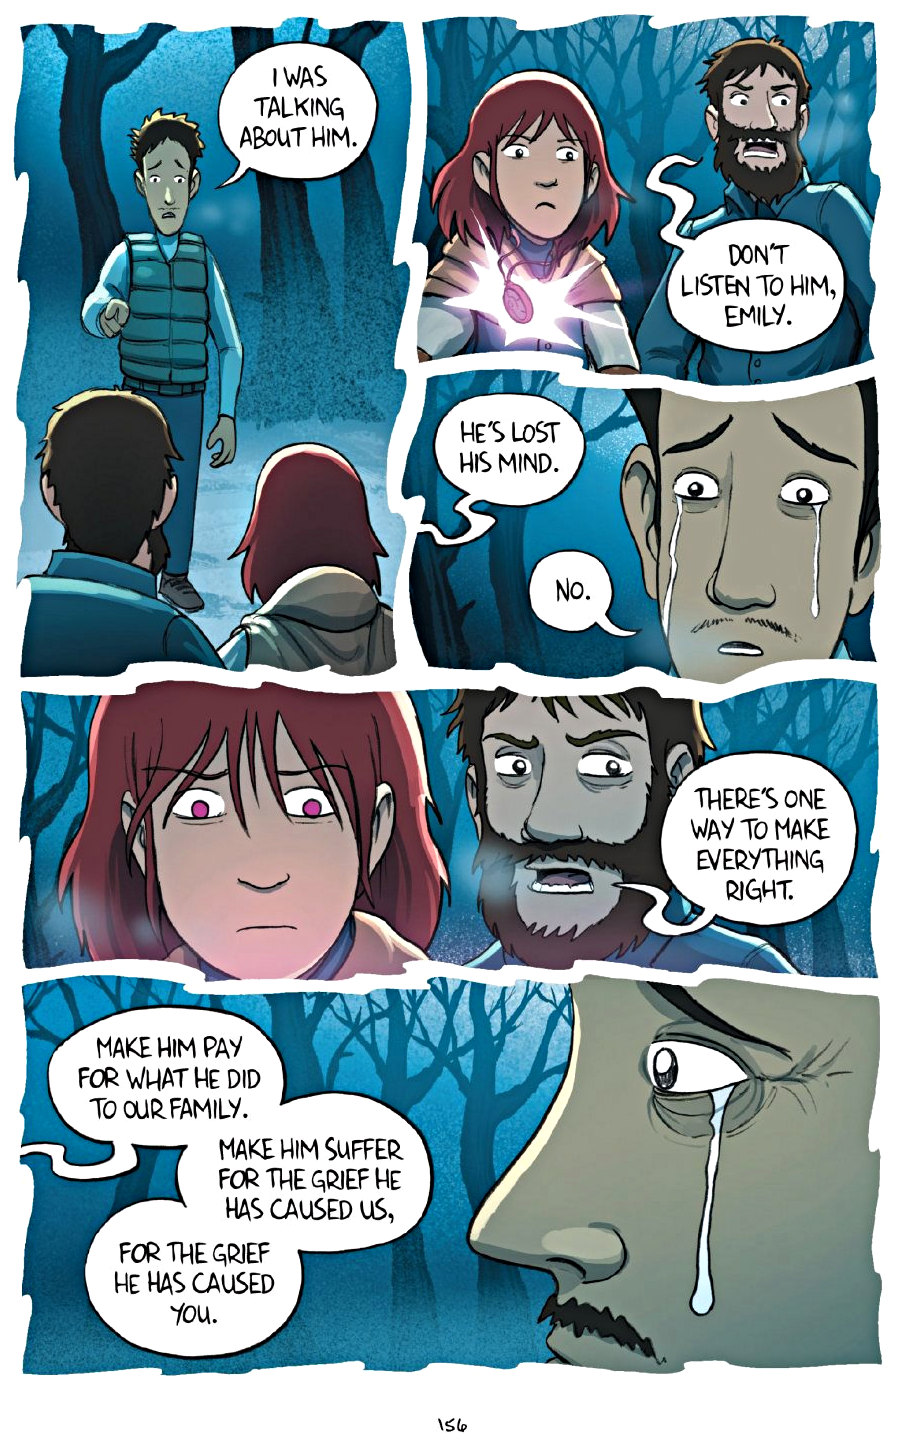 page 156 of amulet 7 firelight graphic novel